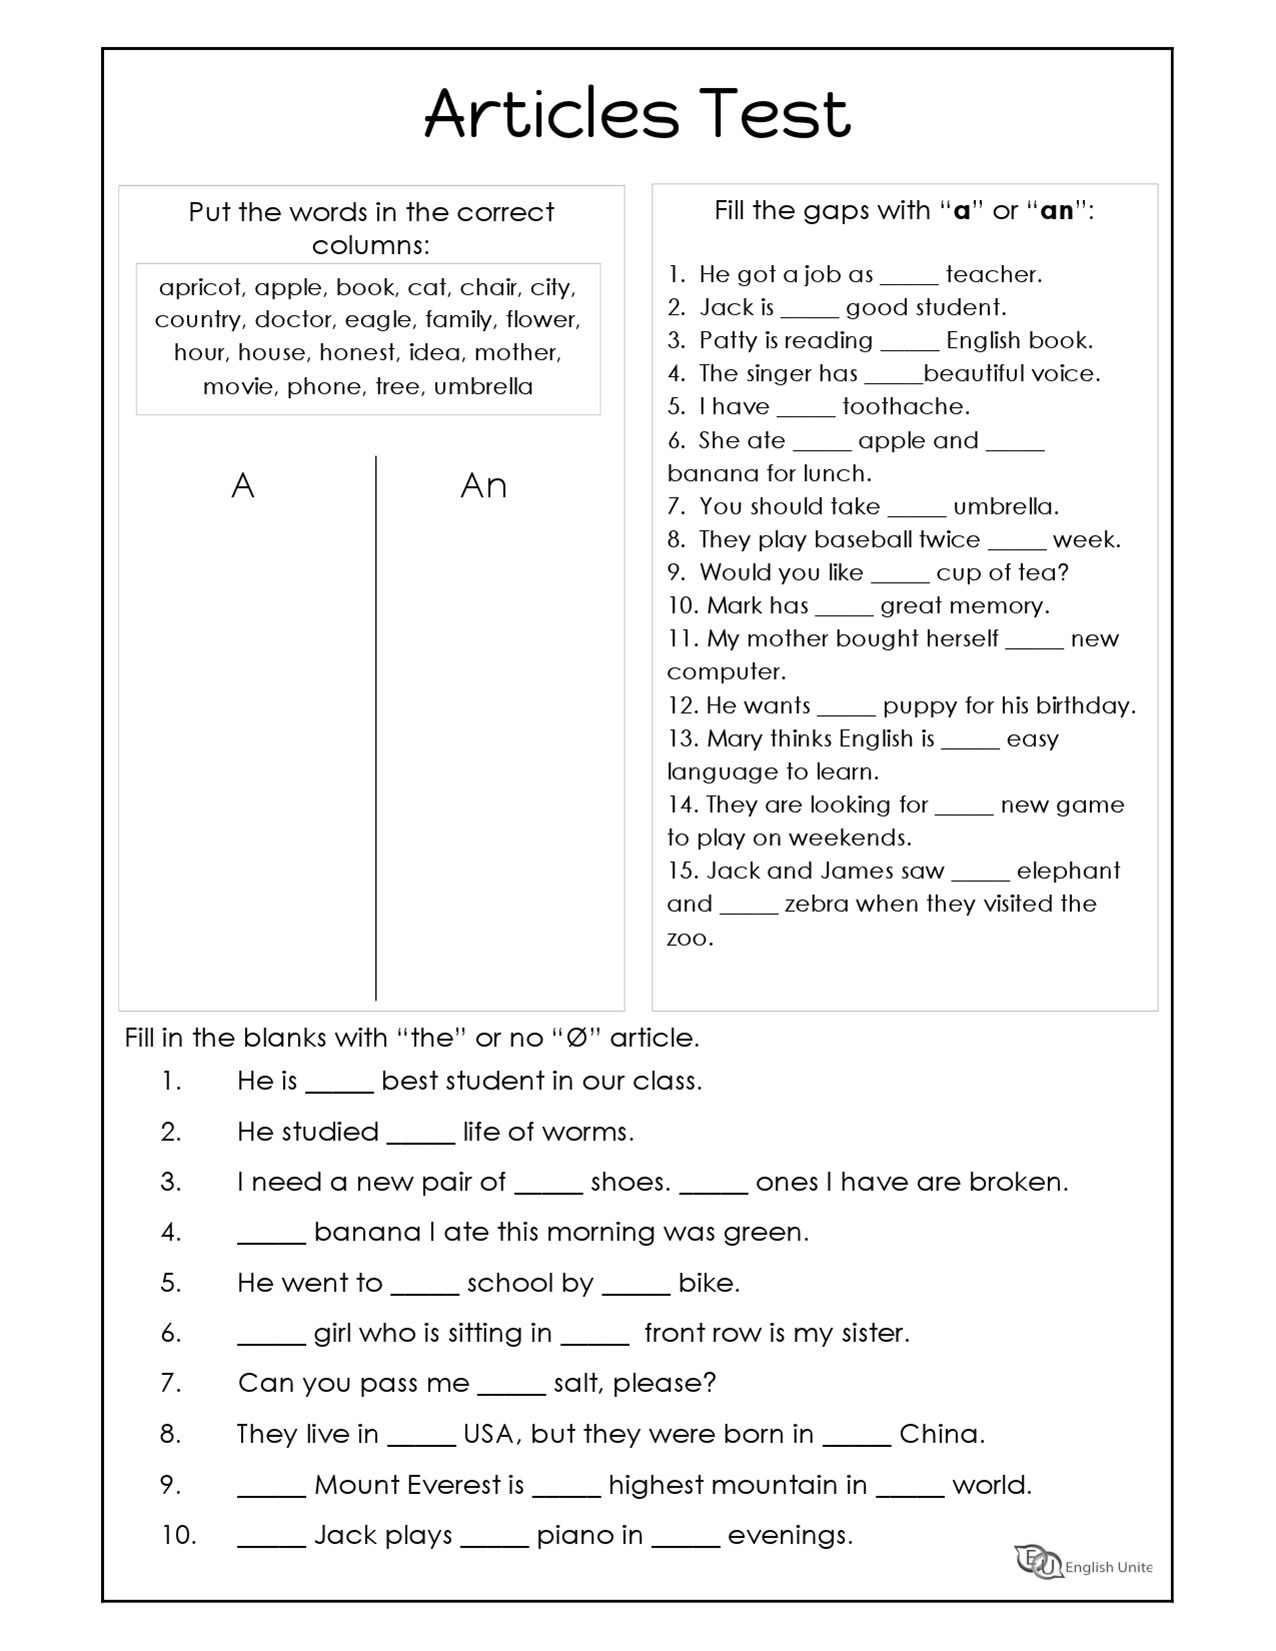 worksheets for grade 1 articles articles an and a worksheet worksheets for 1 articles grade 